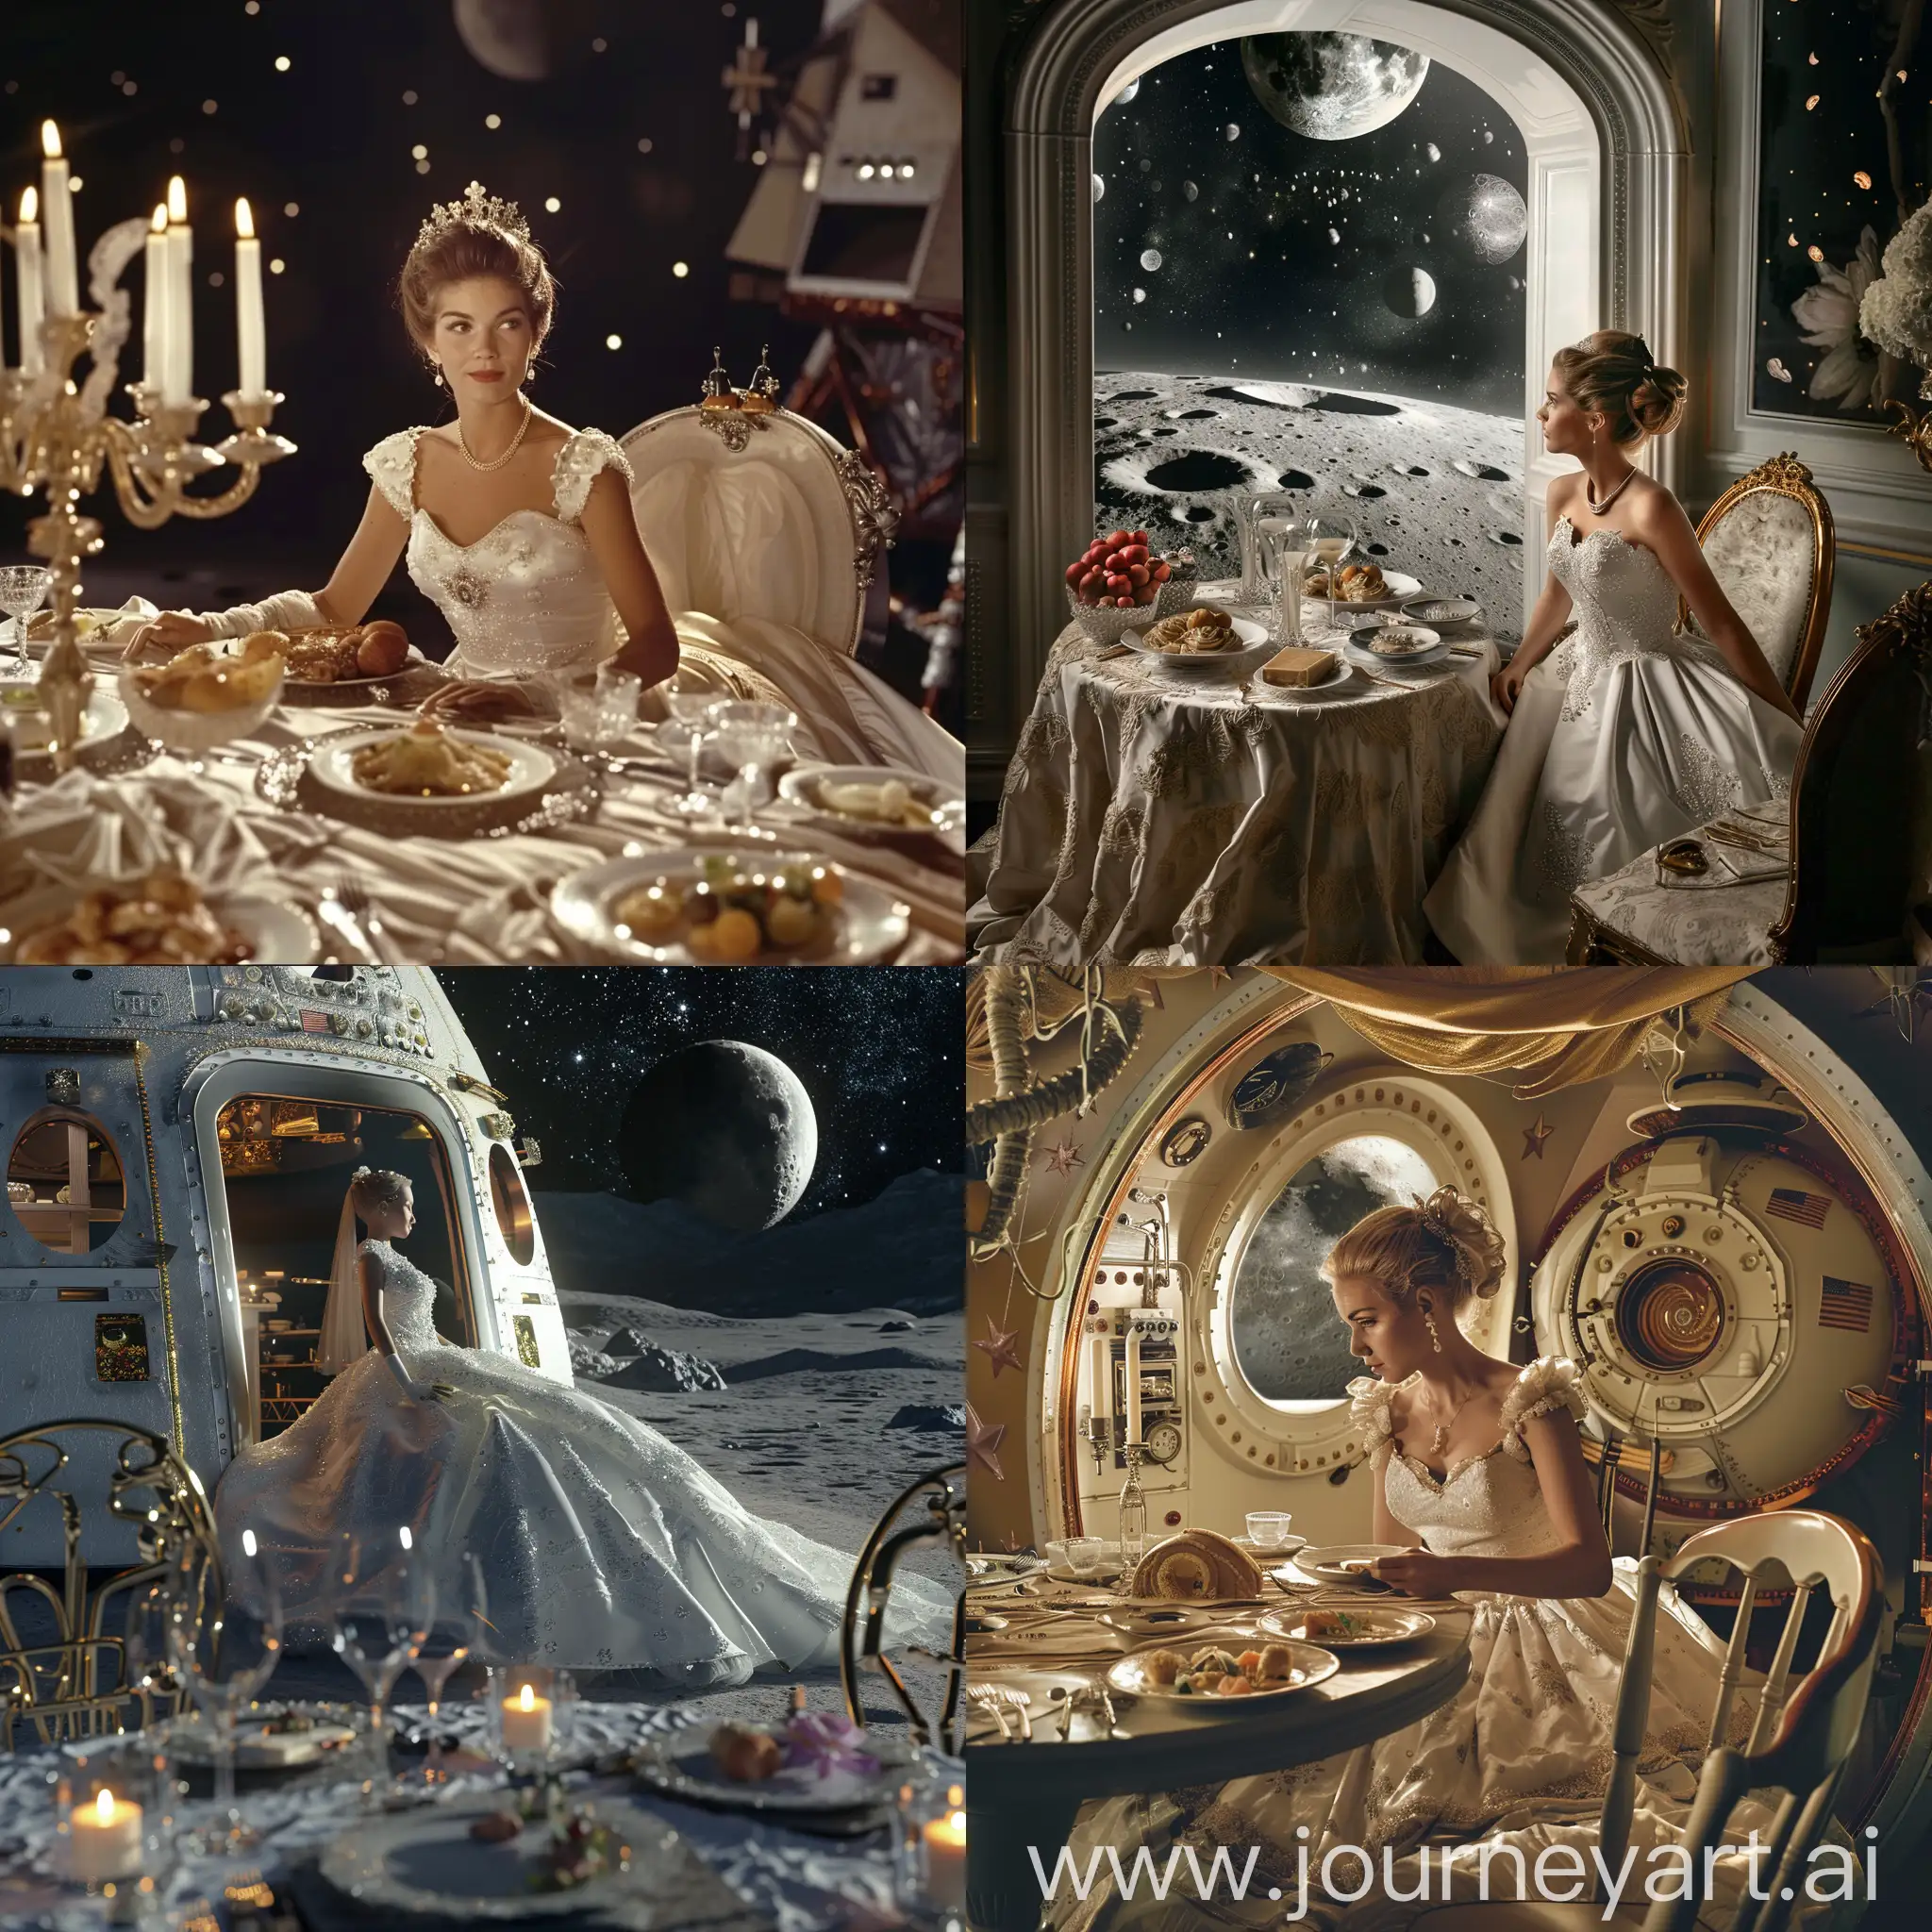 Exquisite-Dinner-for-Princess-Returning-from-Moon-Exploration